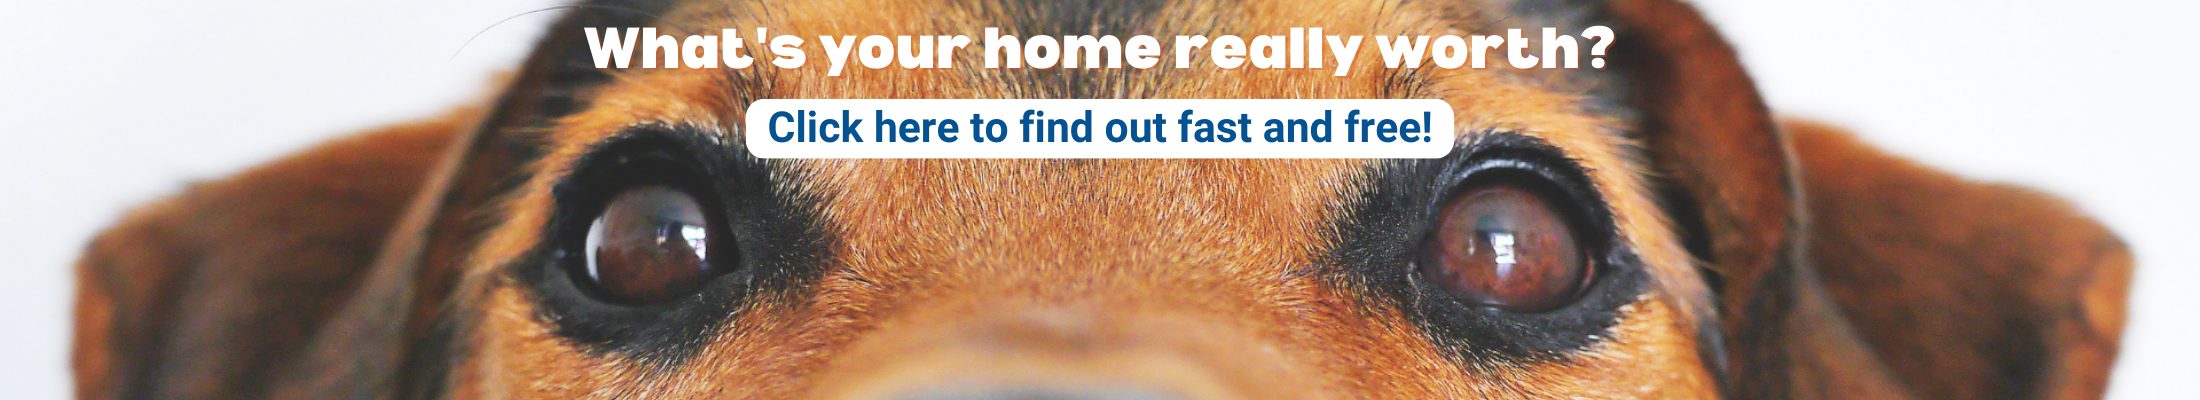 Dog eyes image with text, Whats your home really worth